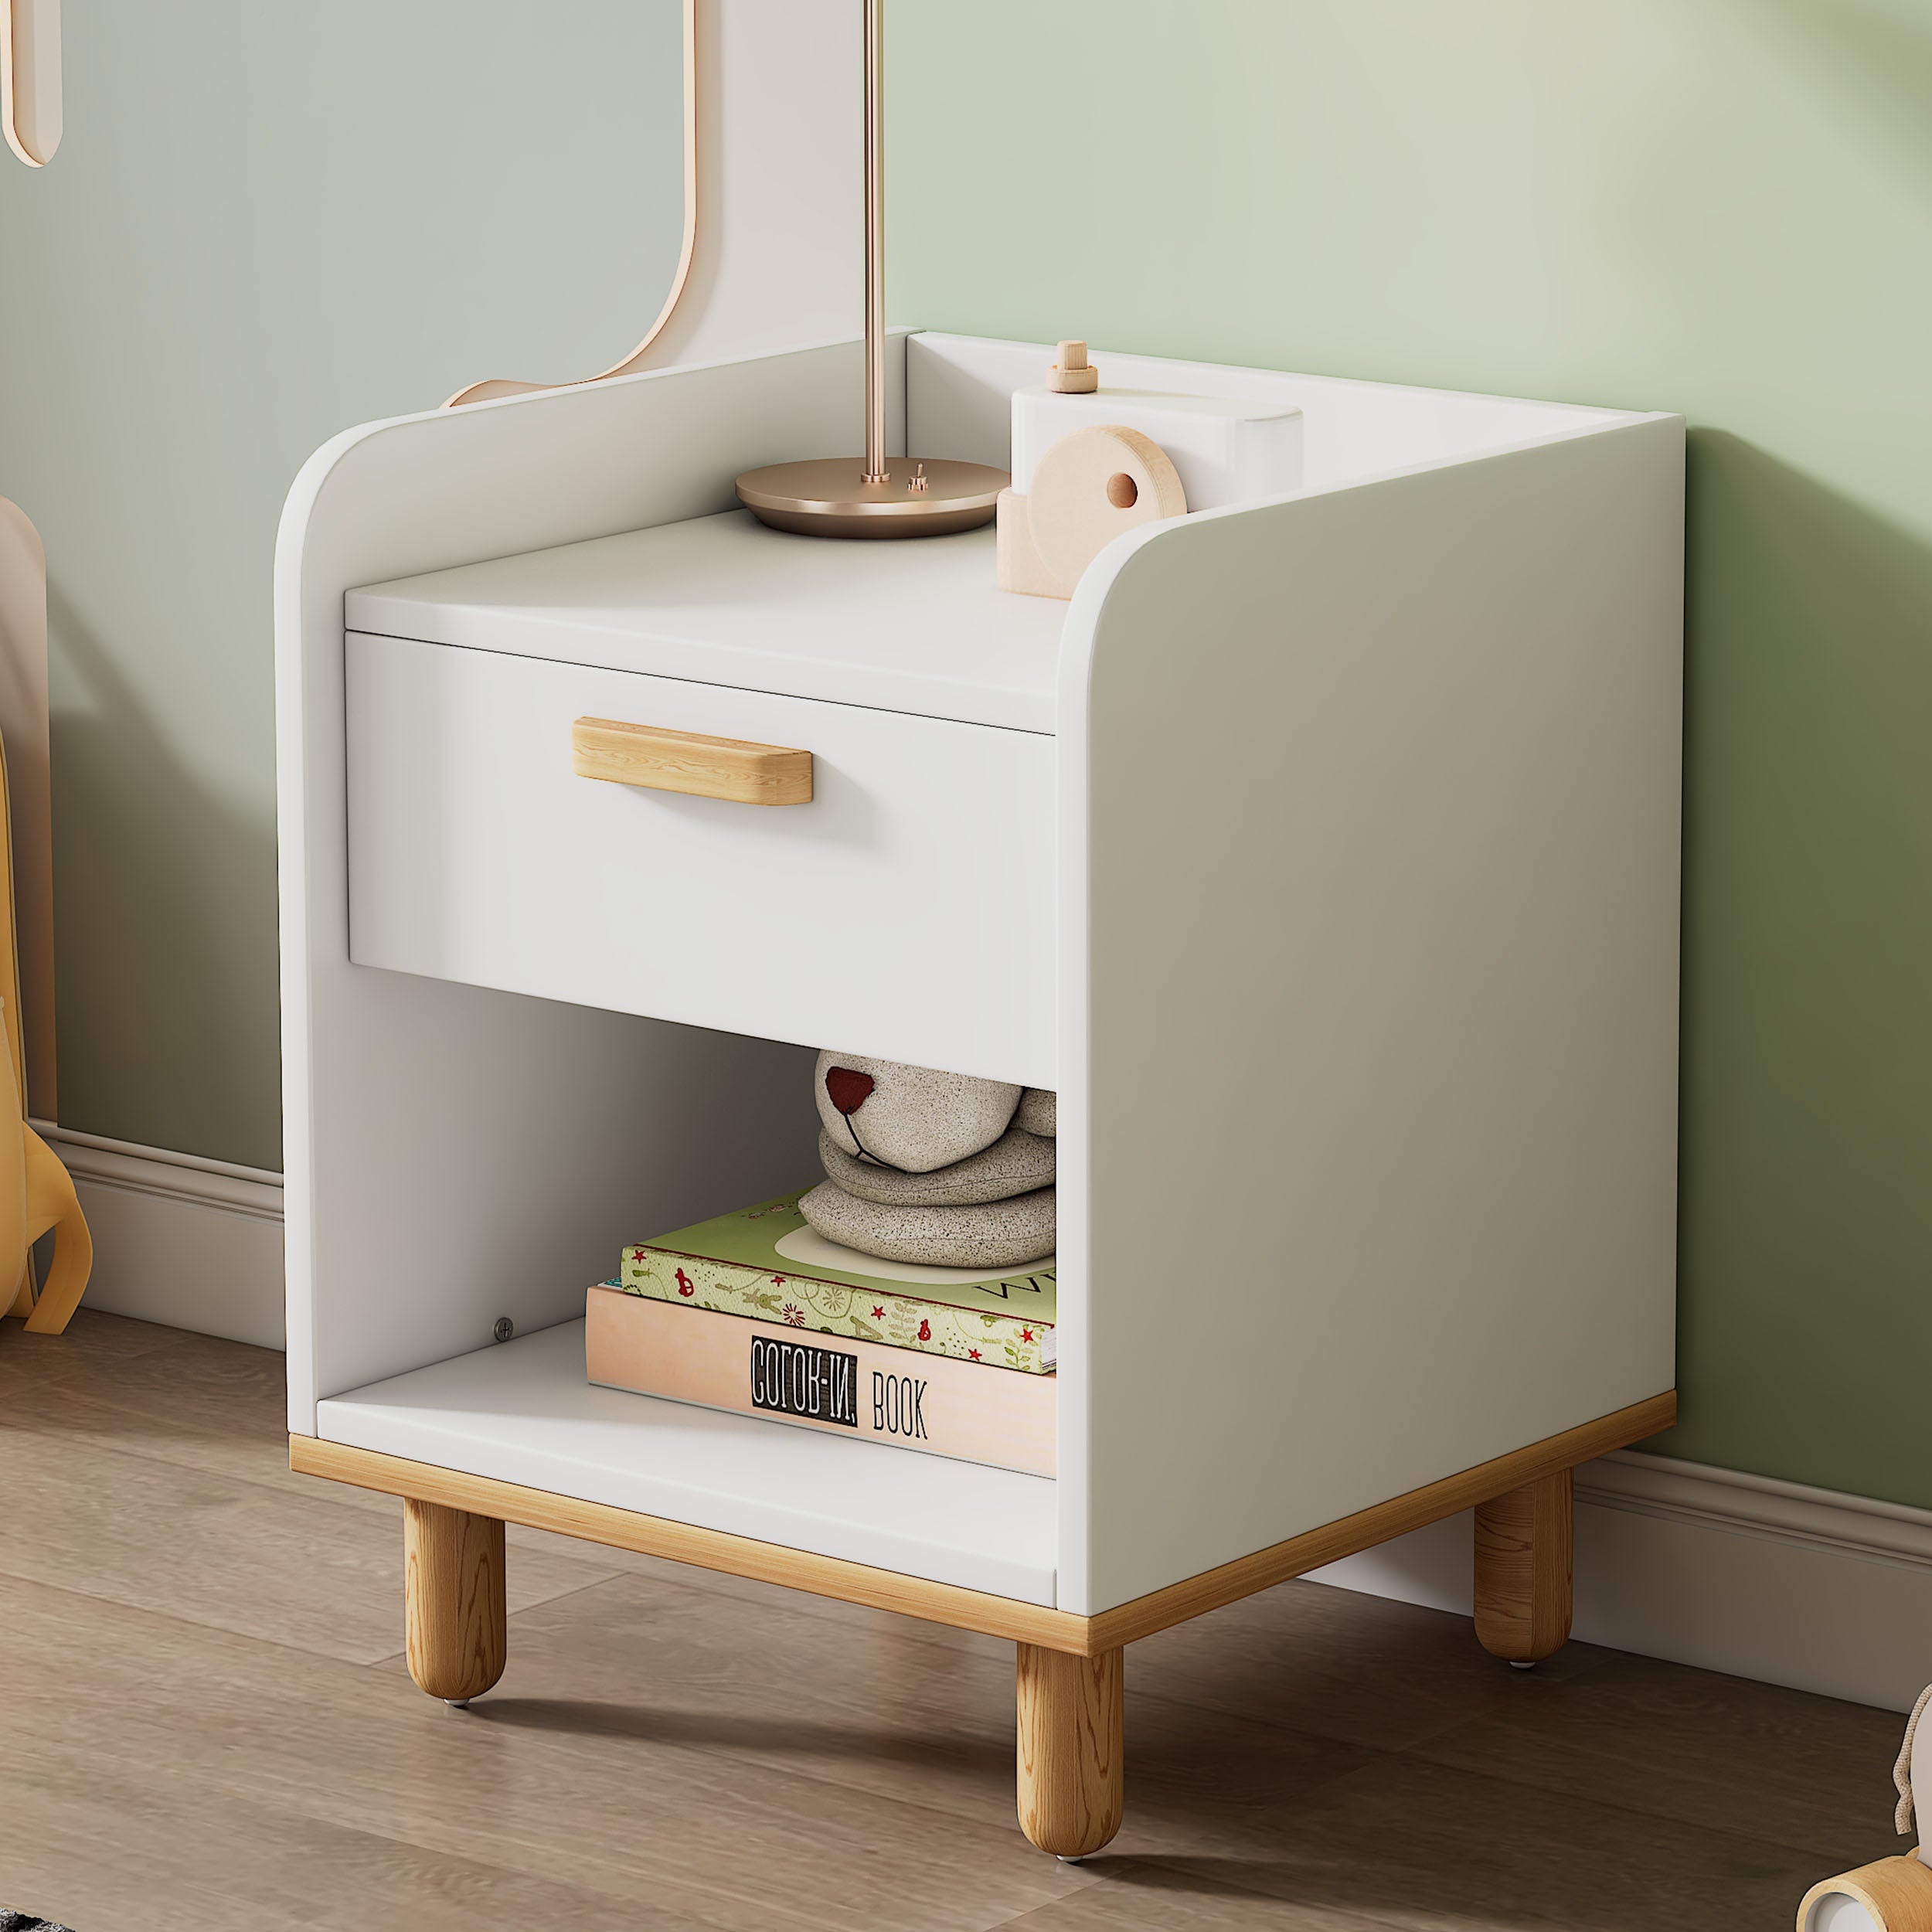 1-Drawer Wood Nightstand in White with Open Storage Shelf